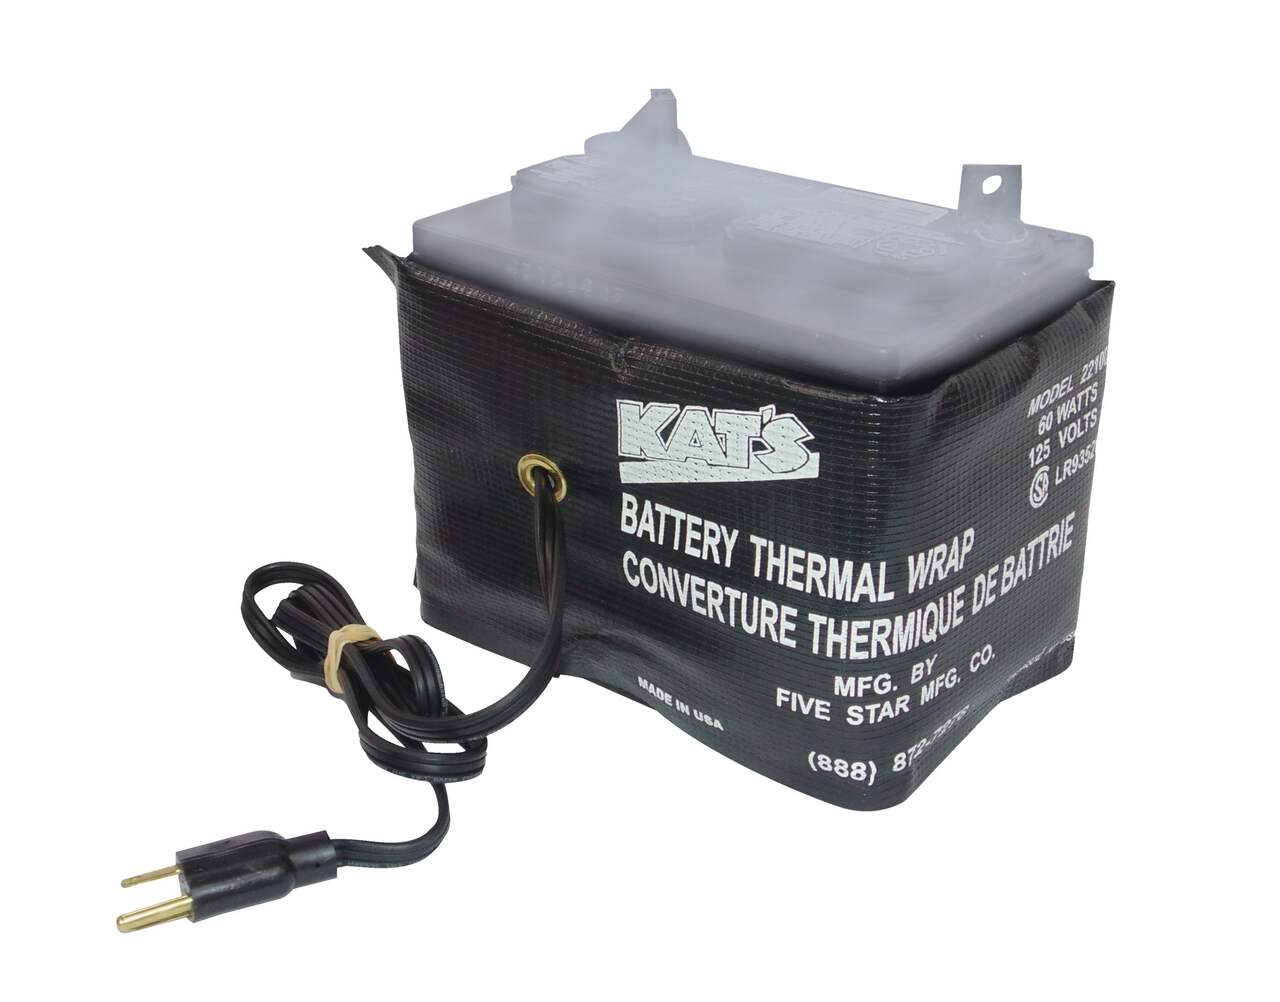 https://media-www.canadiantire.ca/product/automotive/light-auto-parts/auto-battery-accessories/0113118/thinsulate-50-watt-battery-warmer-af367faa-5fef-4a31-a1ca-9be94855b5a8-jpgrendition.jpg?imdensity=1&imwidth=640&impolicy=mZoom